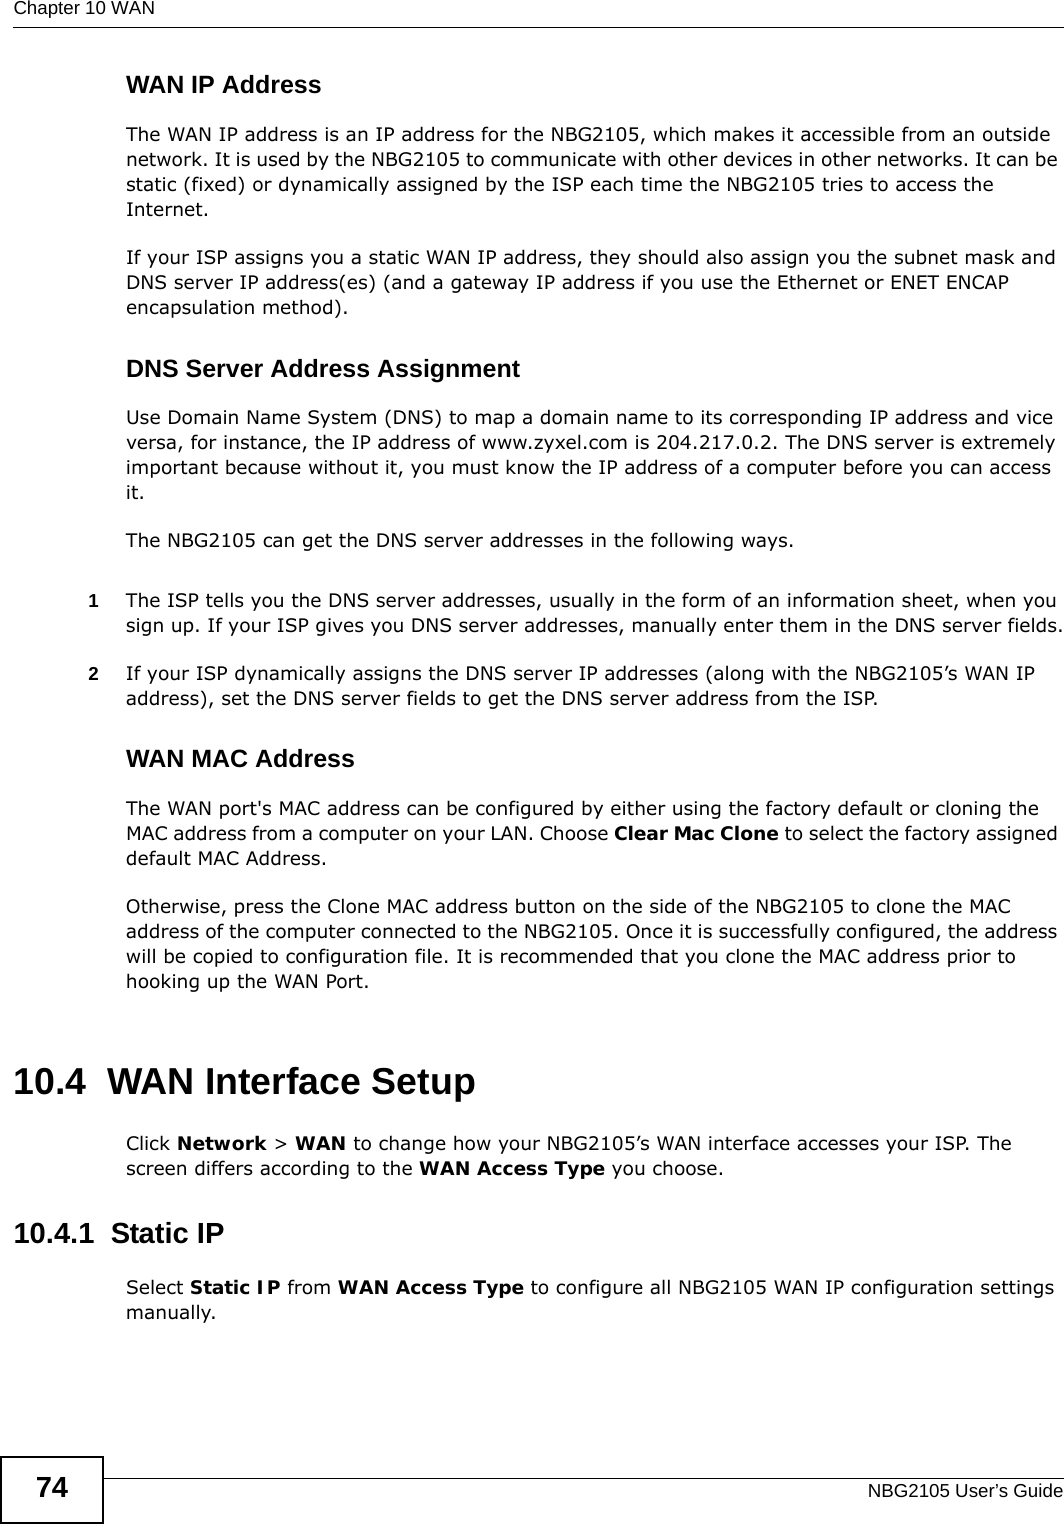 Chapter 10 WANNBG2105 User’s Guide74WAN IP AddressThe WAN IP address is an IP address for the NBG2105, which makes it accessible from an outside network. It is used by the NBG2105 to communicate with other devices in other networks. It can be static (fixed) or dynamically assigned by the ISP each time the NBG2105 tries to access the Internet.If your ISP assigns you a static WAN IP address, they should also assign you the subnet mask and DNS server IP address(es) (and a gateway IP address if you use the Ethernet or ENET ENCAP encapsulation method).DNS Server Address AssignmentUse Domain Name System (DNS) to map a domain name to its corresponding IP address and vice versa, for instance, the IP address of www.zyxel.com is 204.217.0.2. The DNS server is extremely important because without it, you must know the IP address of a computer before you can access it. The NBG2105 can get the DNS server addresses in the following ways.1The ISP tells you the DNS server addresses, usually in the form of an information sheet, when you sign up. If your ISP gives you DNS server addresses, manually enter them in the DNS server fields.2If your ISP dynamically assigns the DNS server IP addresses (along with the NBG2105’s WAN IP address), set the DNS server fields to get the DNS server address from the ISP. WAN MAC AddressThe WAN port&apos;s MAC address can be configured by either using the factory default or cloning the MAC address from a computer on your LAN. Choose Clear Mac Clone to select the factory assigned default MAC Address.Otherwise, press the Clone MAC address button on the side of the NBG2105 to clone the MAC address of the computer connected to the NBG2105. Once it is successfully configured, the address will be copied to configuration file. It is recommended that you clone the MAC address prior to hooking up the WAN Port.10.4  WAN Interface SetupClick Network &gt; WAN to change how your NBG2105’s WAN interface accesses your ISP. The screen differs according to the WAN Access Type you choose.10.4.1  Static IPSelect Static IP from WAN Access Type to configure all NBG2105 WAN IP configuration settings manually.